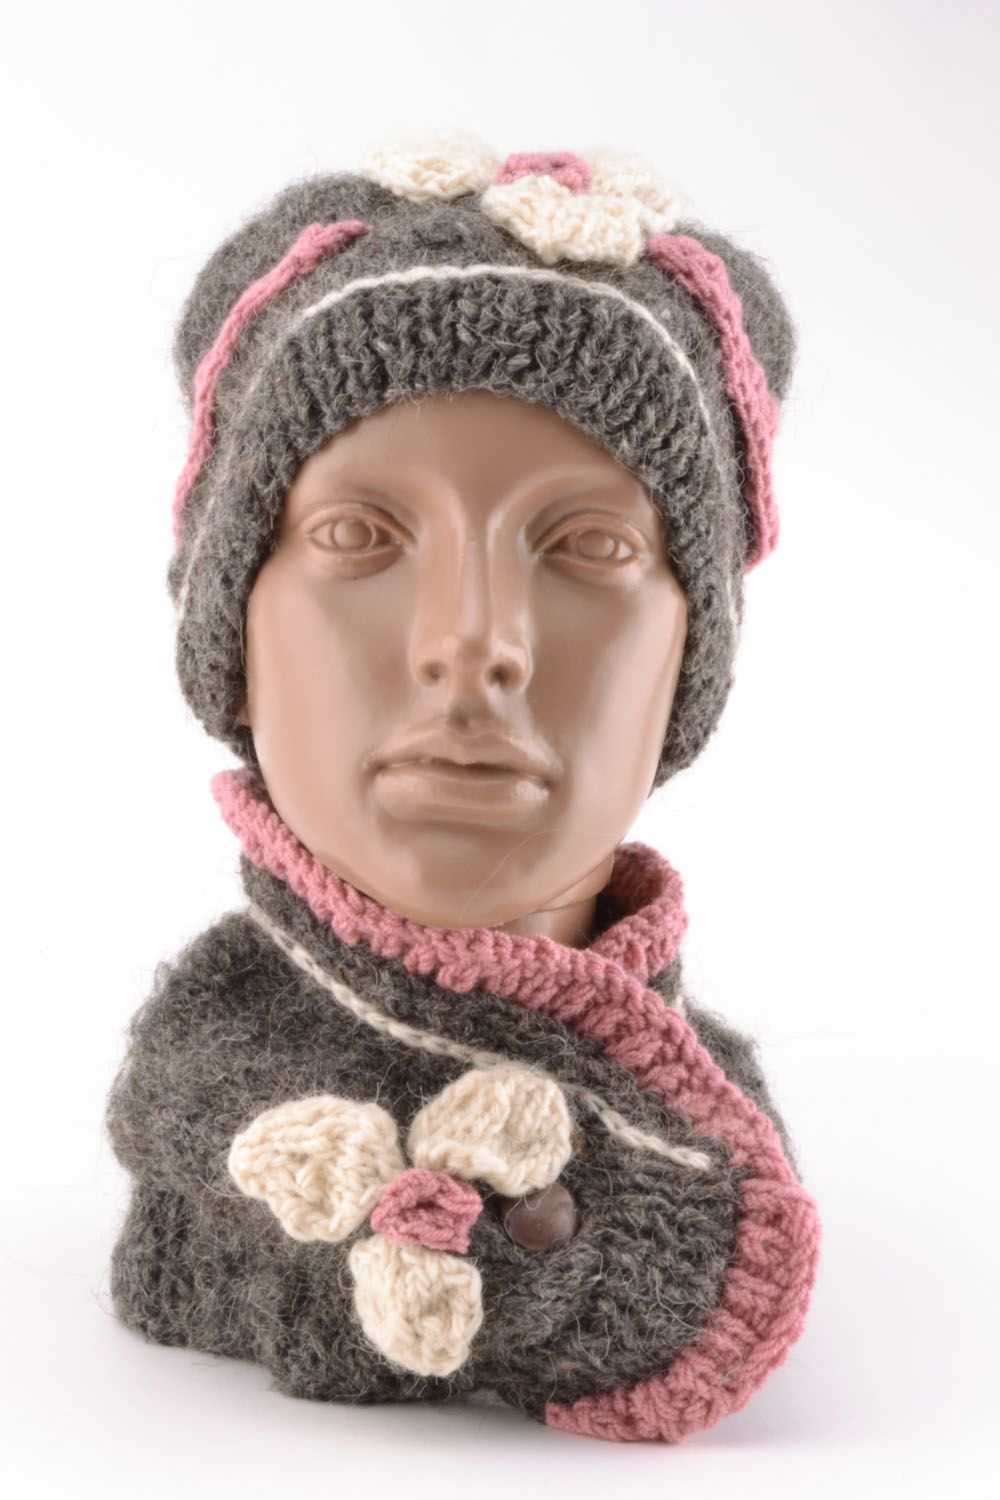 Woolen knitted scarf and hat photo 1